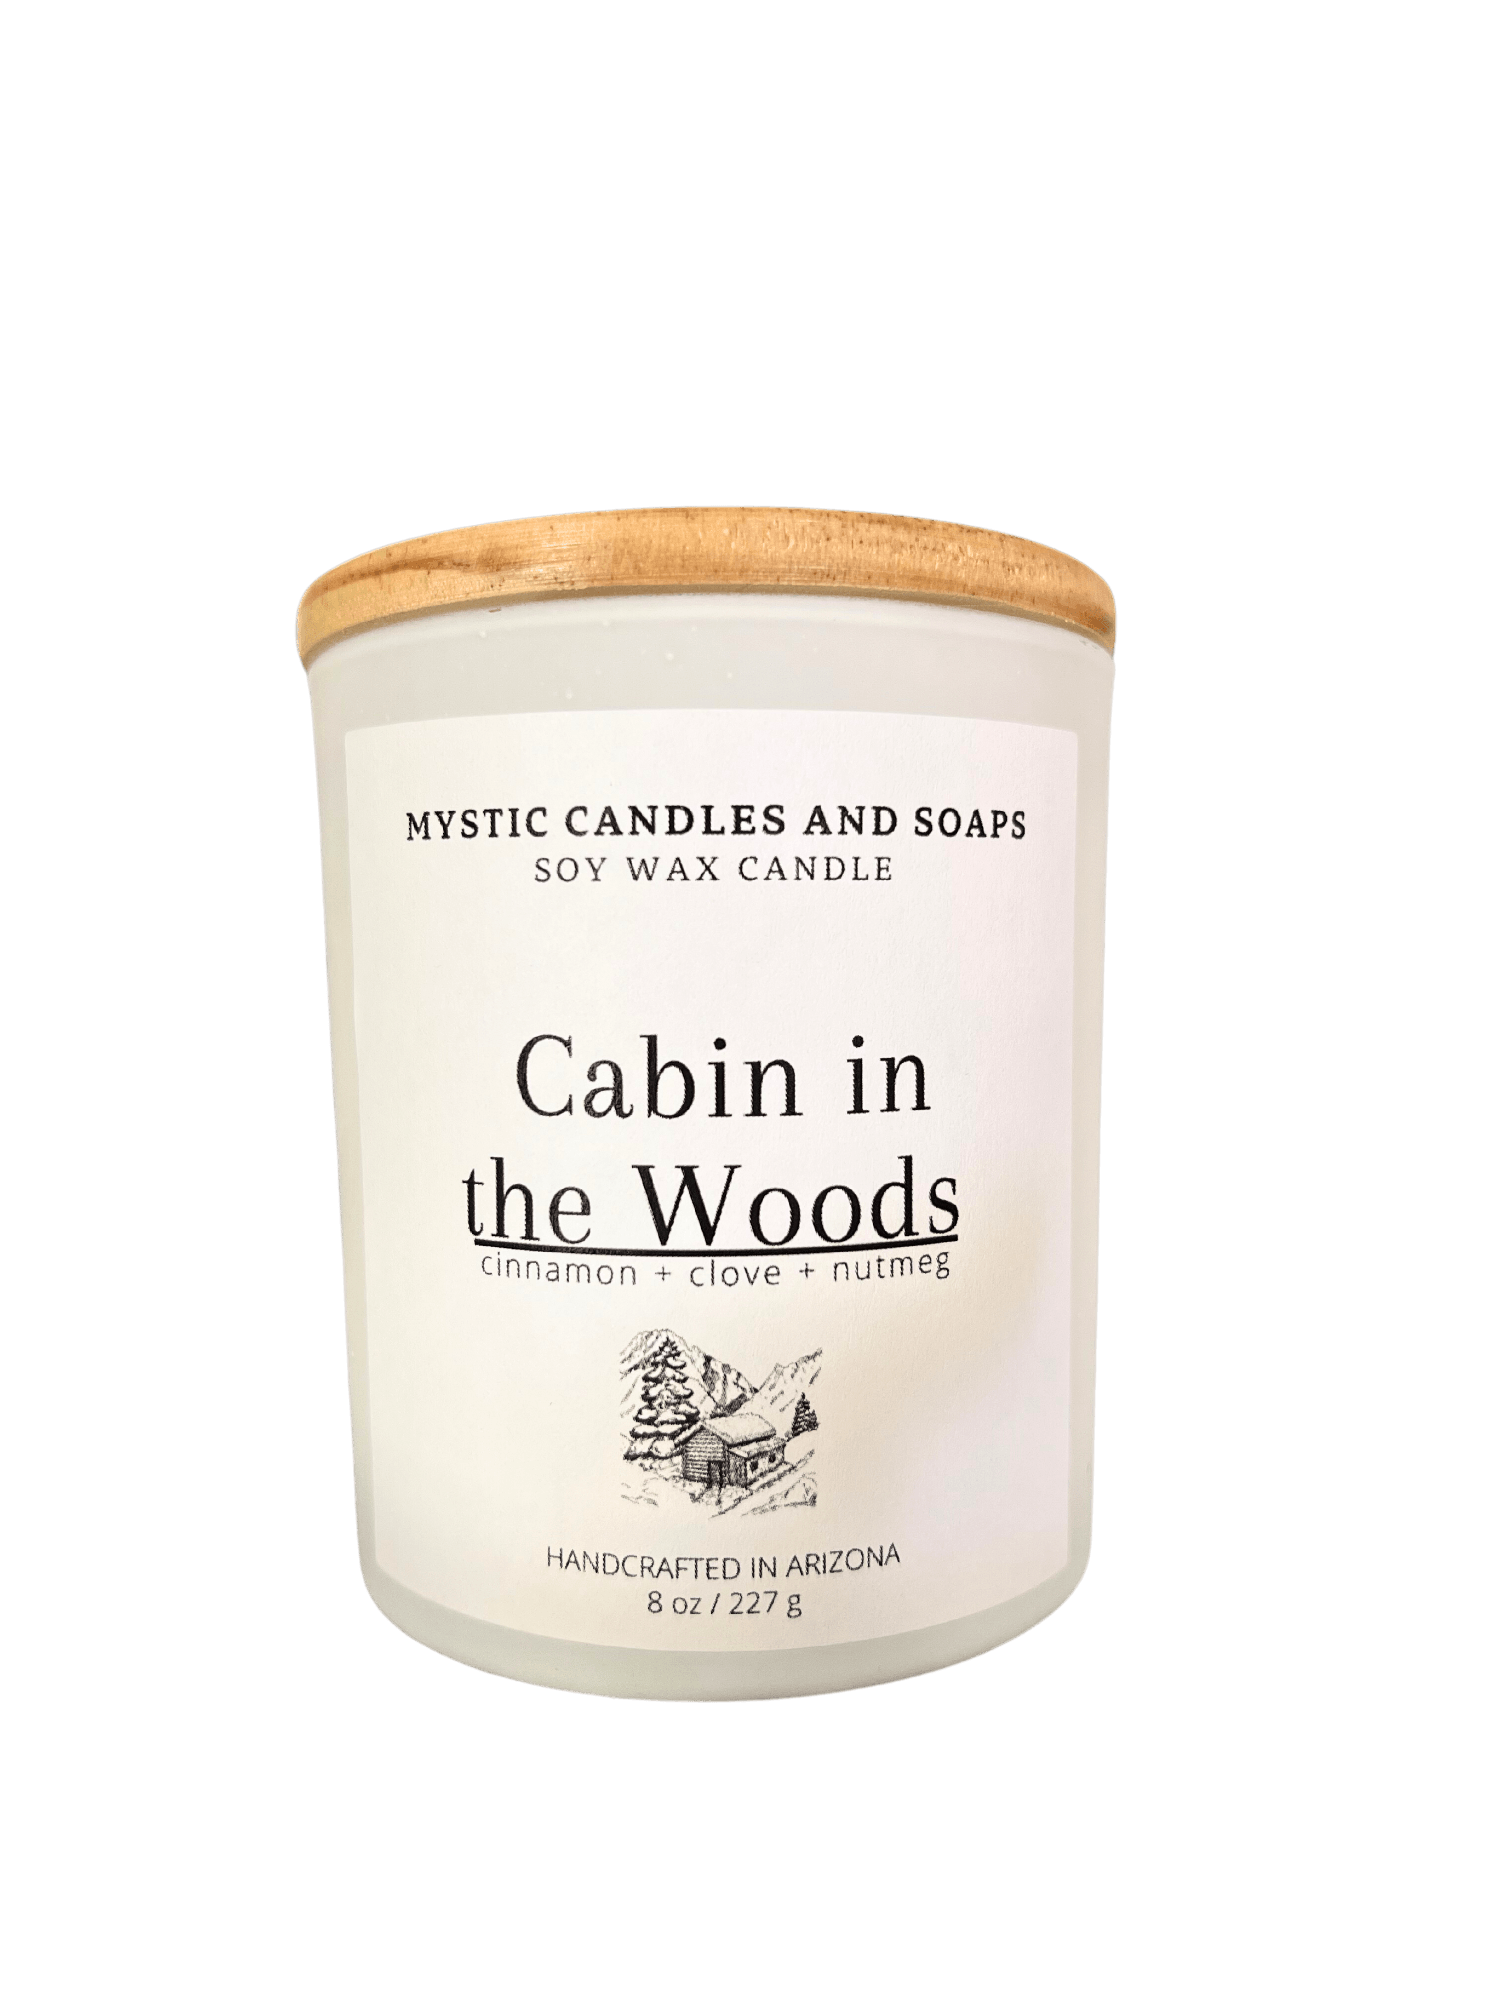 Cabin in the Woods Candle - Mystic Candles and Soaps LLC